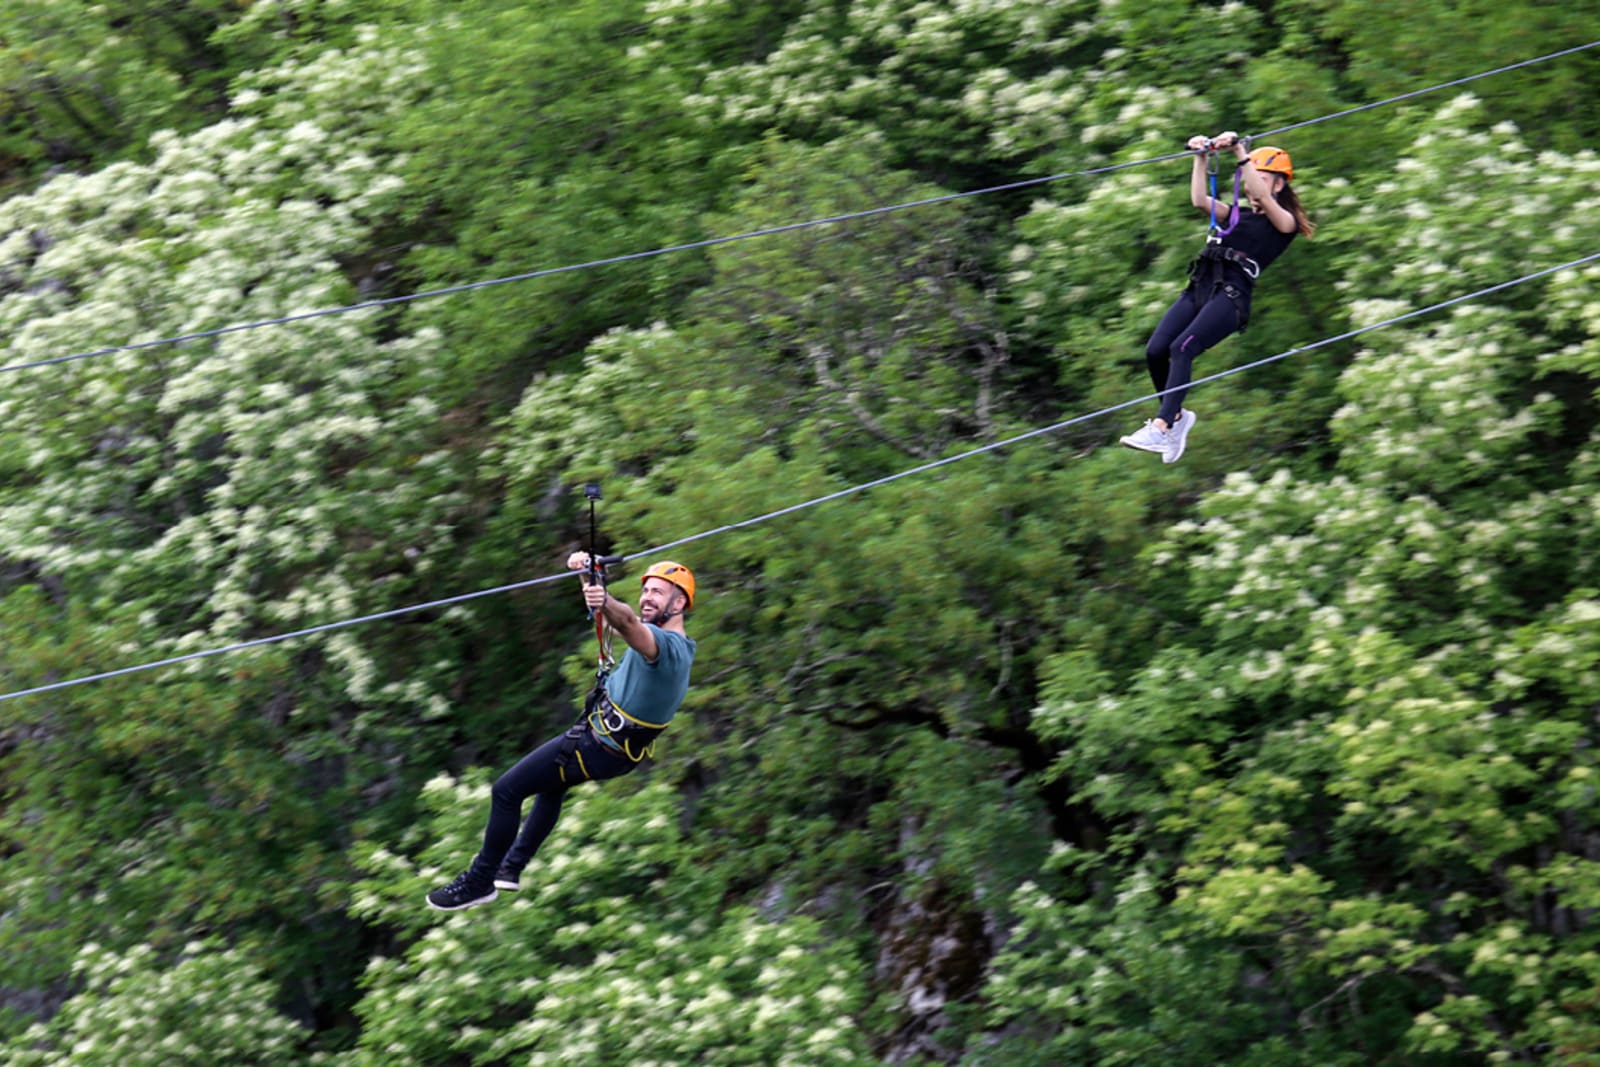 A couple ziplining above the trees at a natural park in Punta Cana